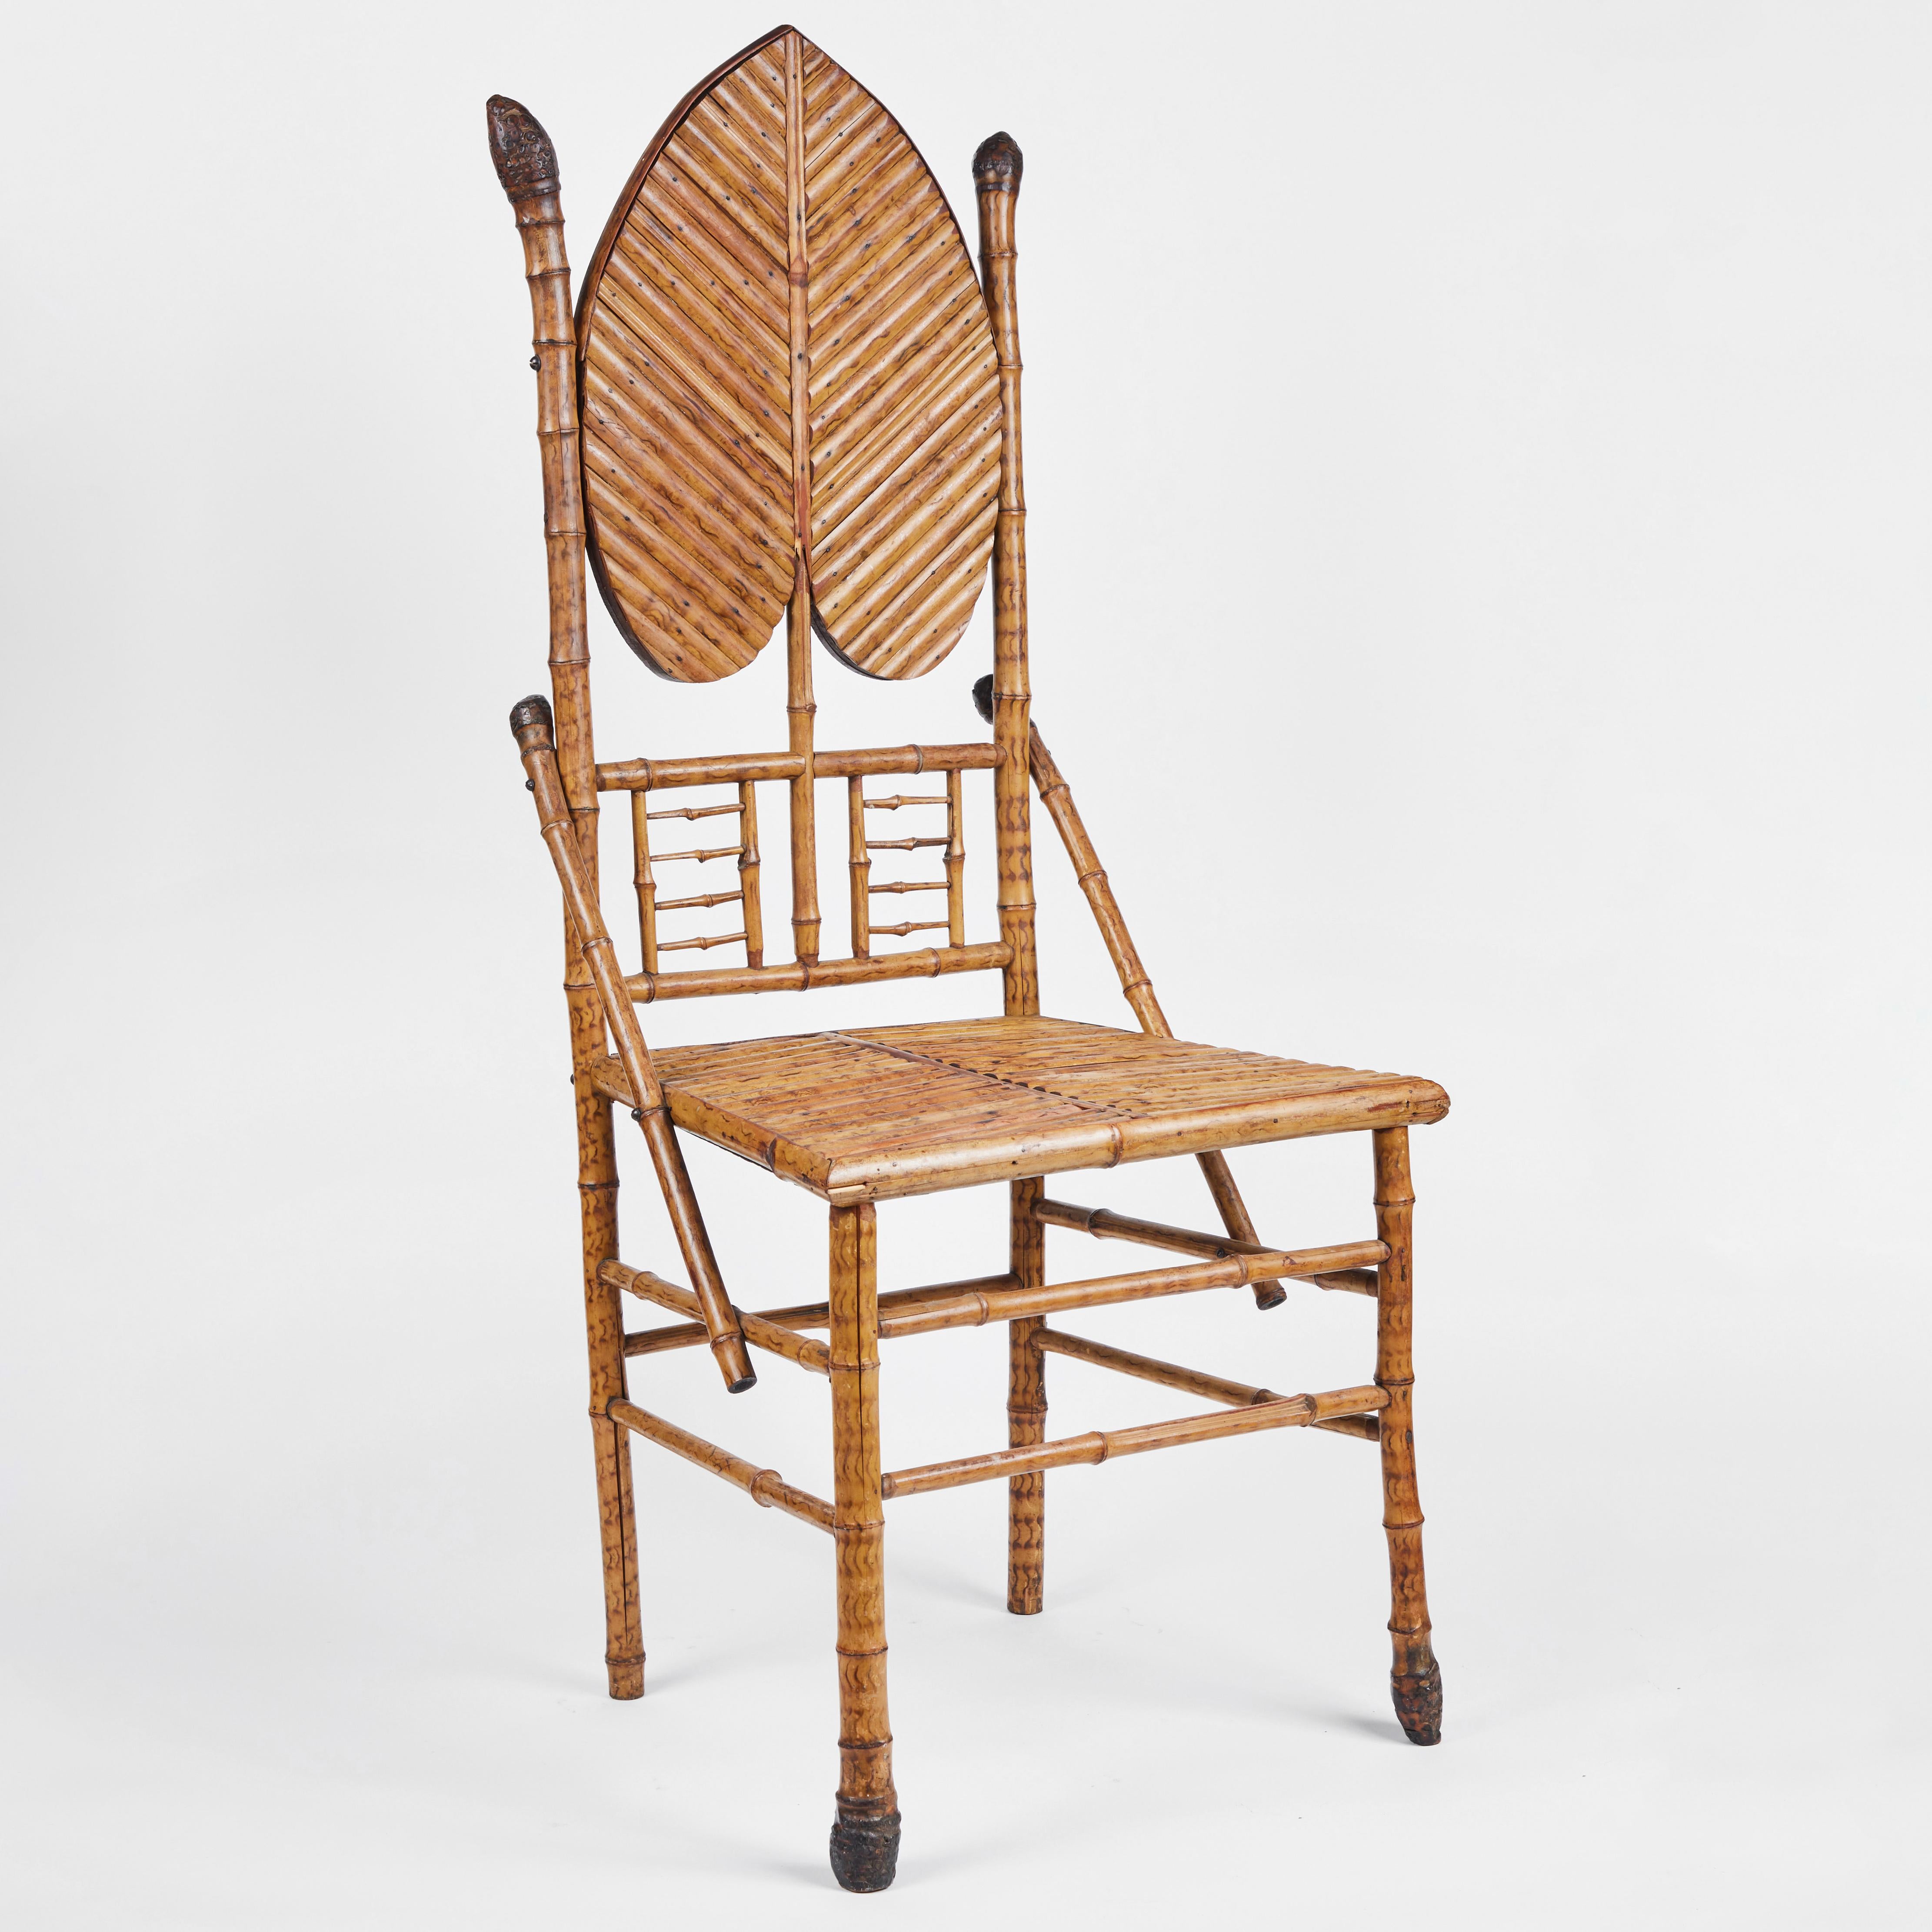 Antique English bamboo side chair with leaf motif and split bamboo seat.

Measures: 19.5